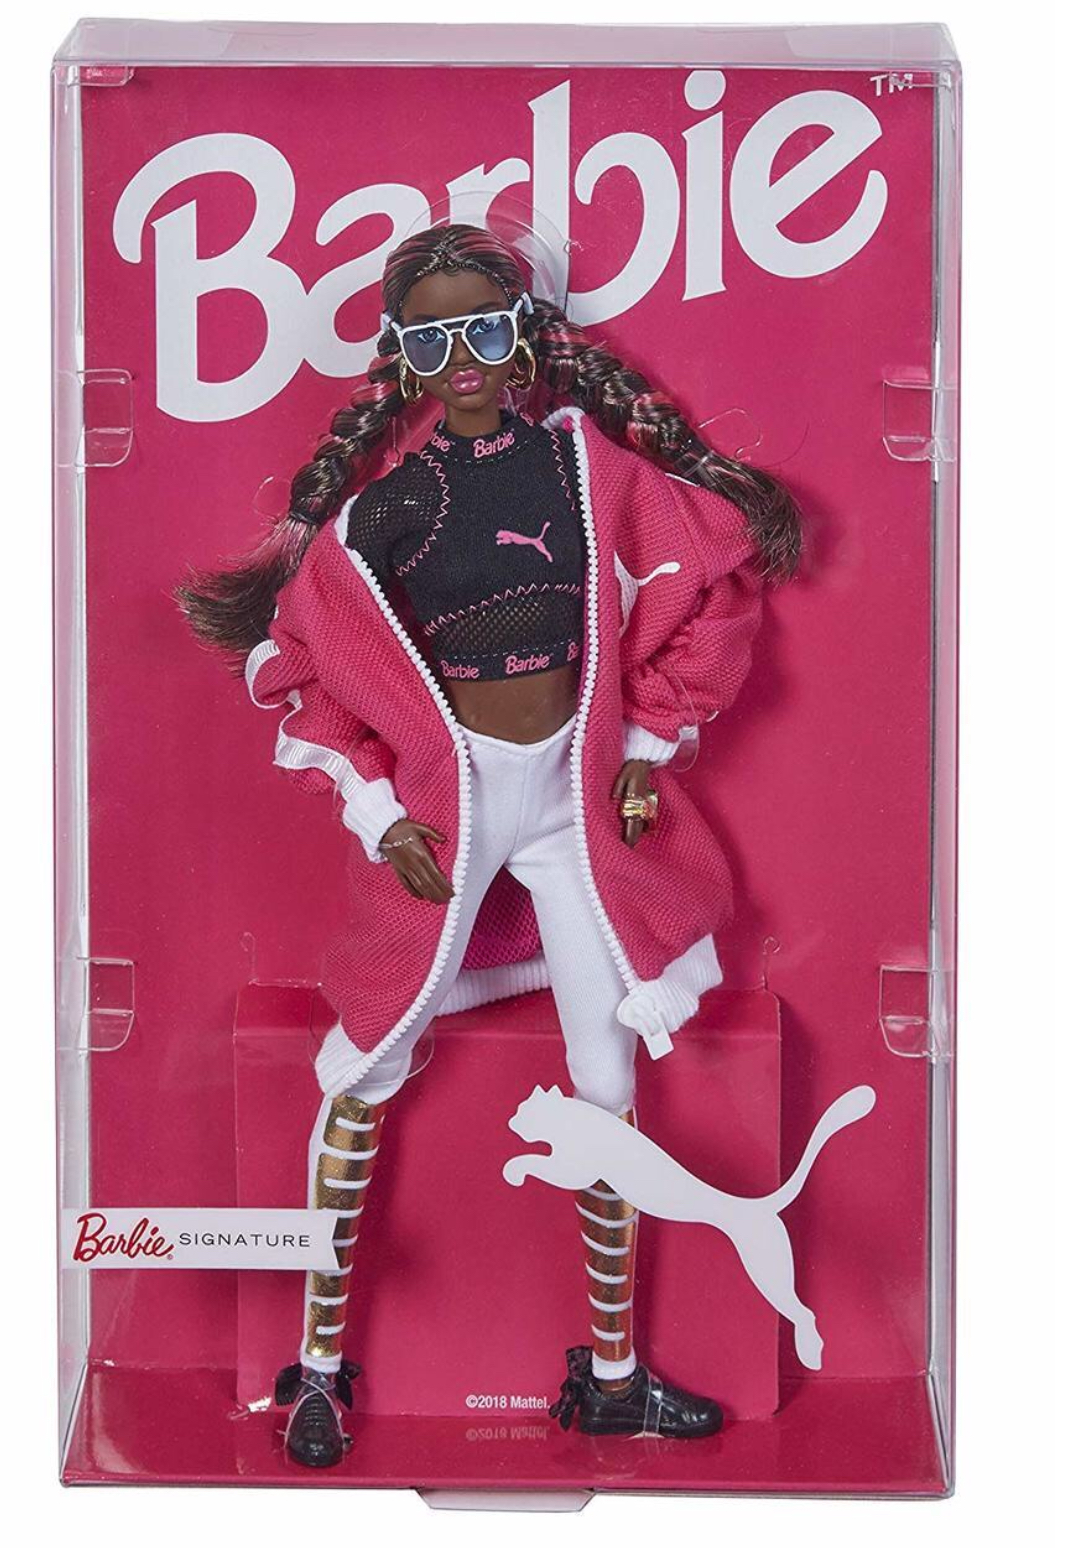 Booth Zes geweten David Bowie Is Barbie's Latest Muse - V Magazine